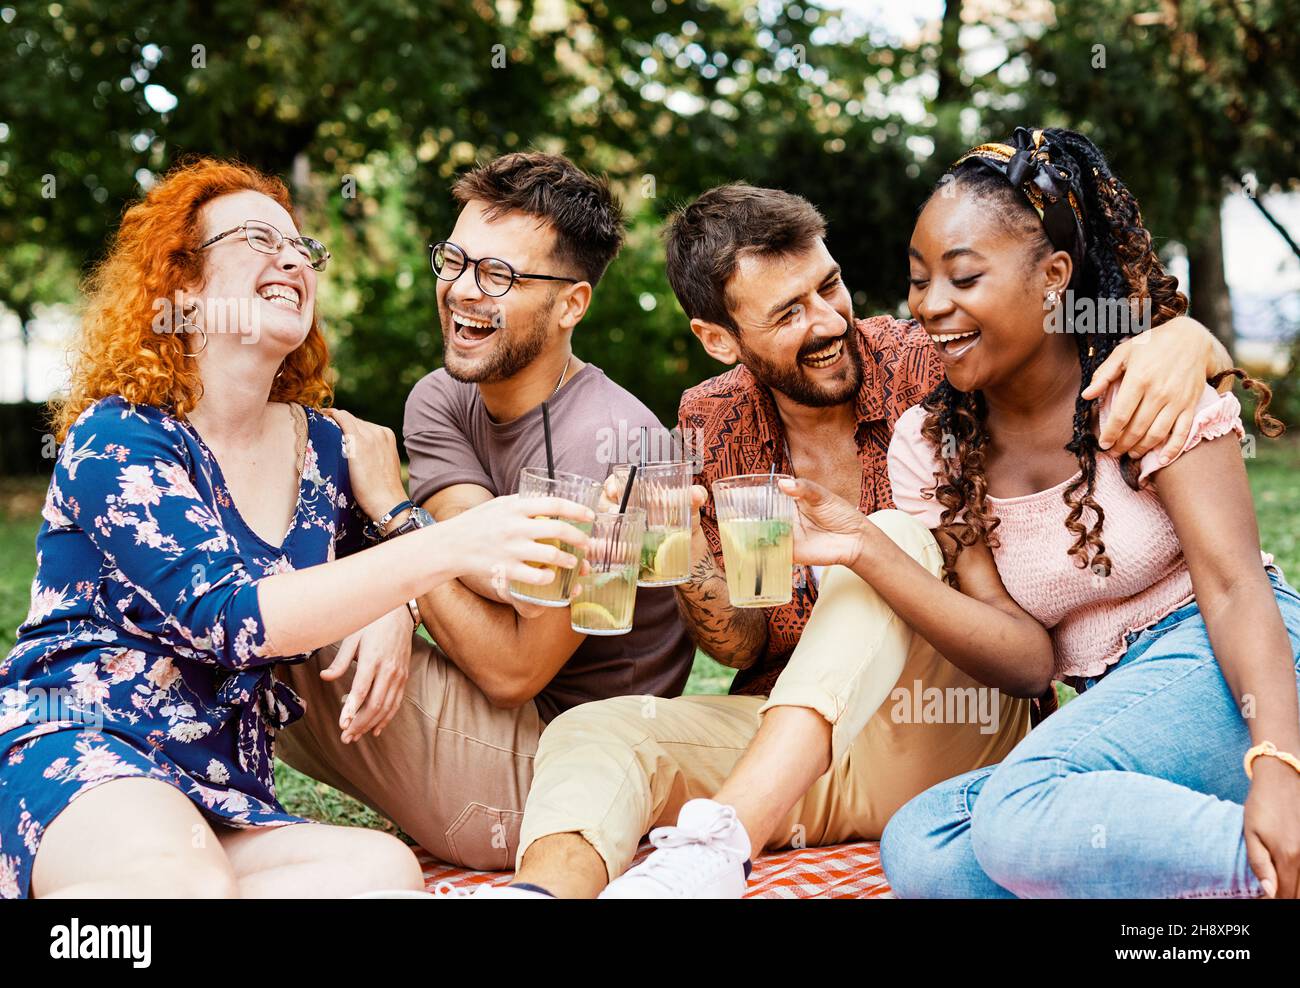 picnic fun outdoor woman friend summer friendship man lifestyle smiling happy toast party couple Stock Photo